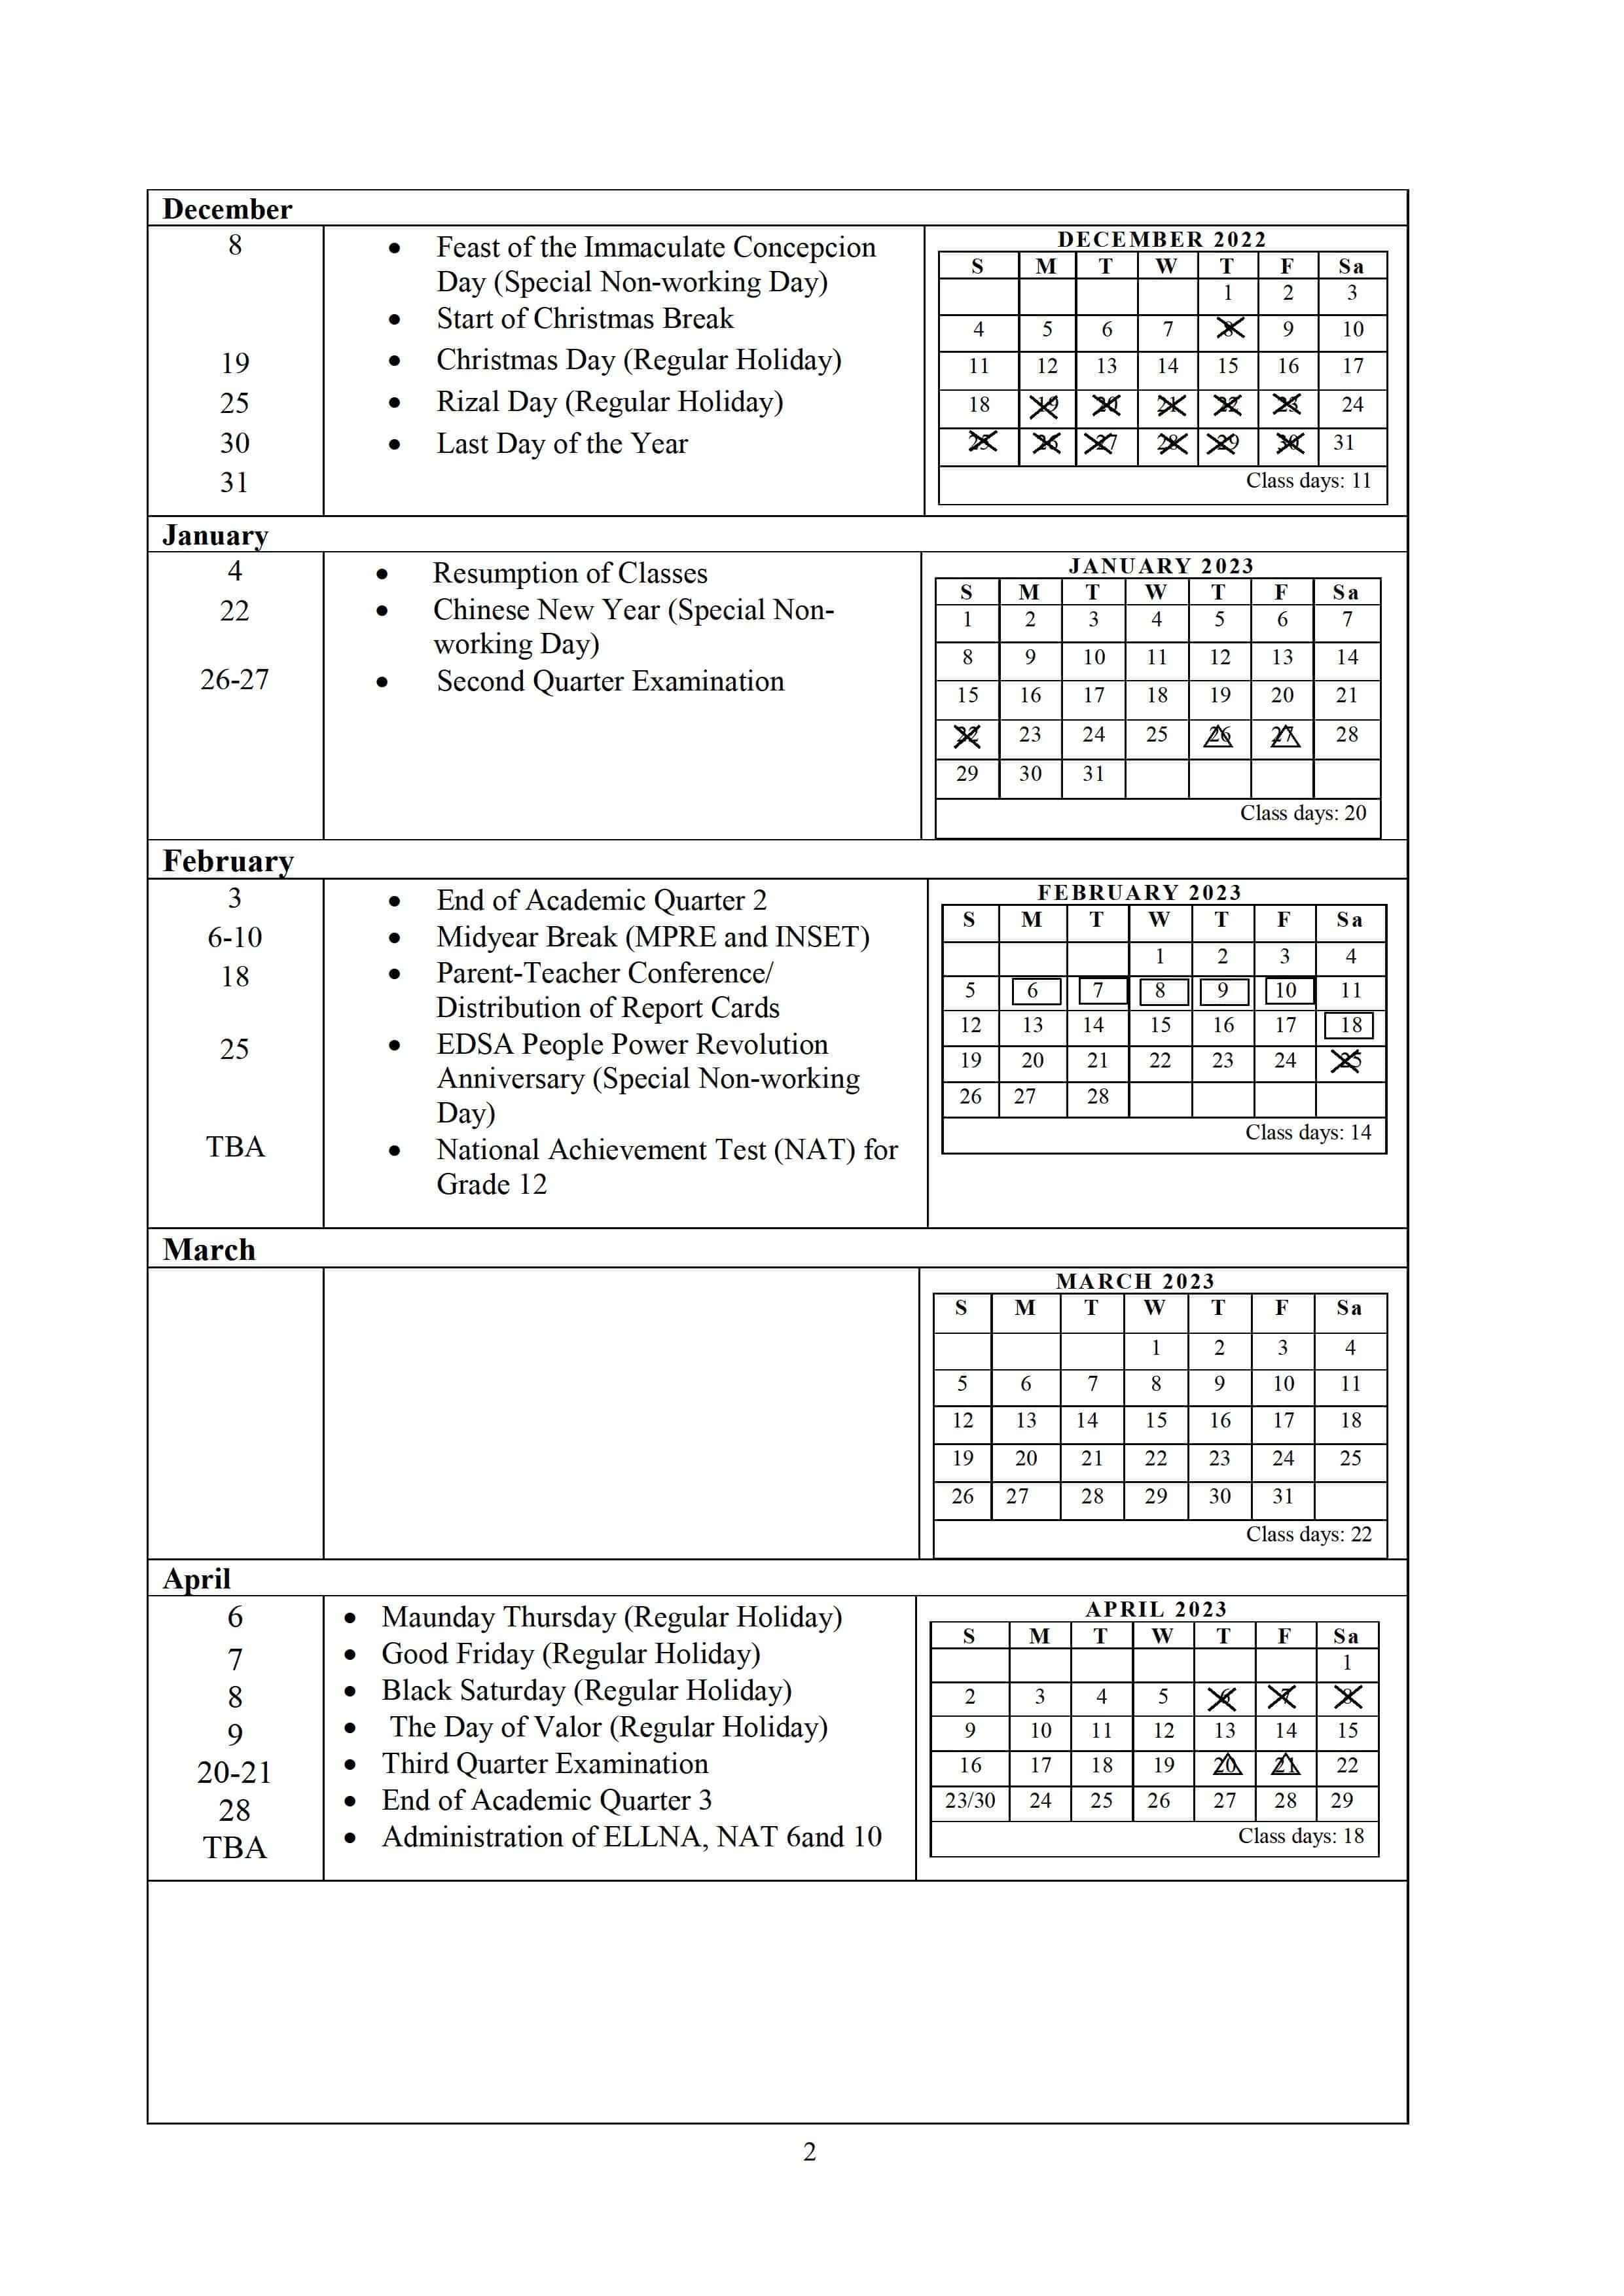 deped-school-calendar-2023-to-2023-holidays-time-and-date-calendar